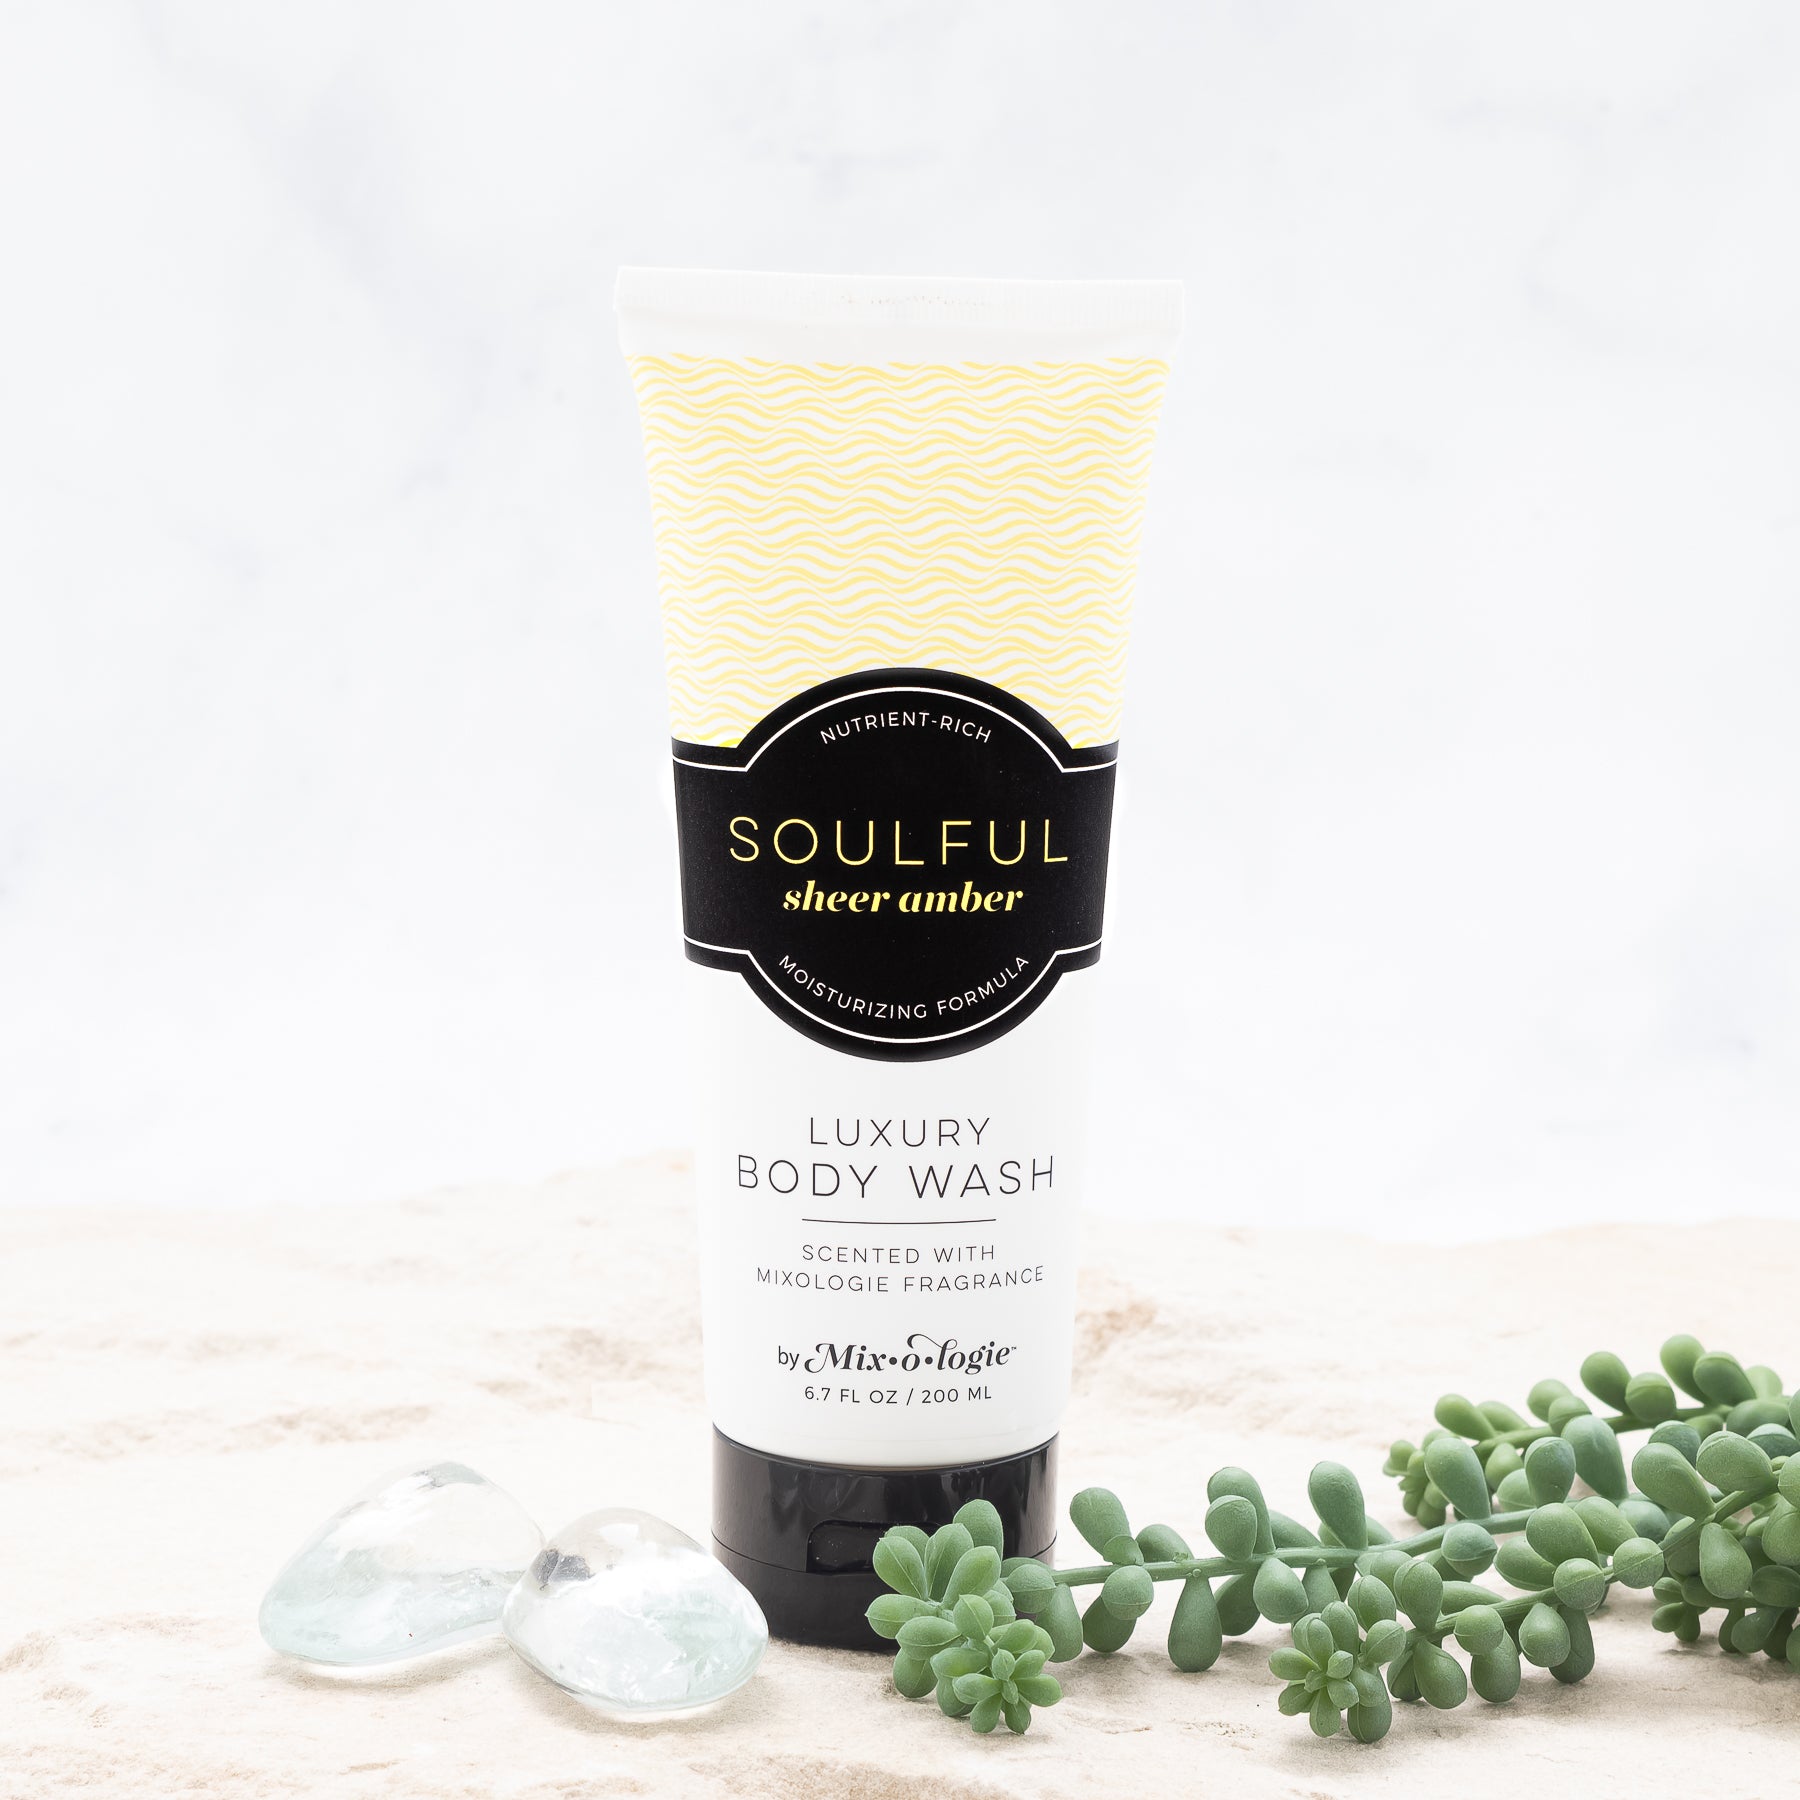 Luxury Body Wash in Mixologie’s Soulful (Sheer Amber) in bright yellow color sample package with black label. Contains 6.7 fl oz or 200 mL pictured on a white background with sand, rocks, and greenery.